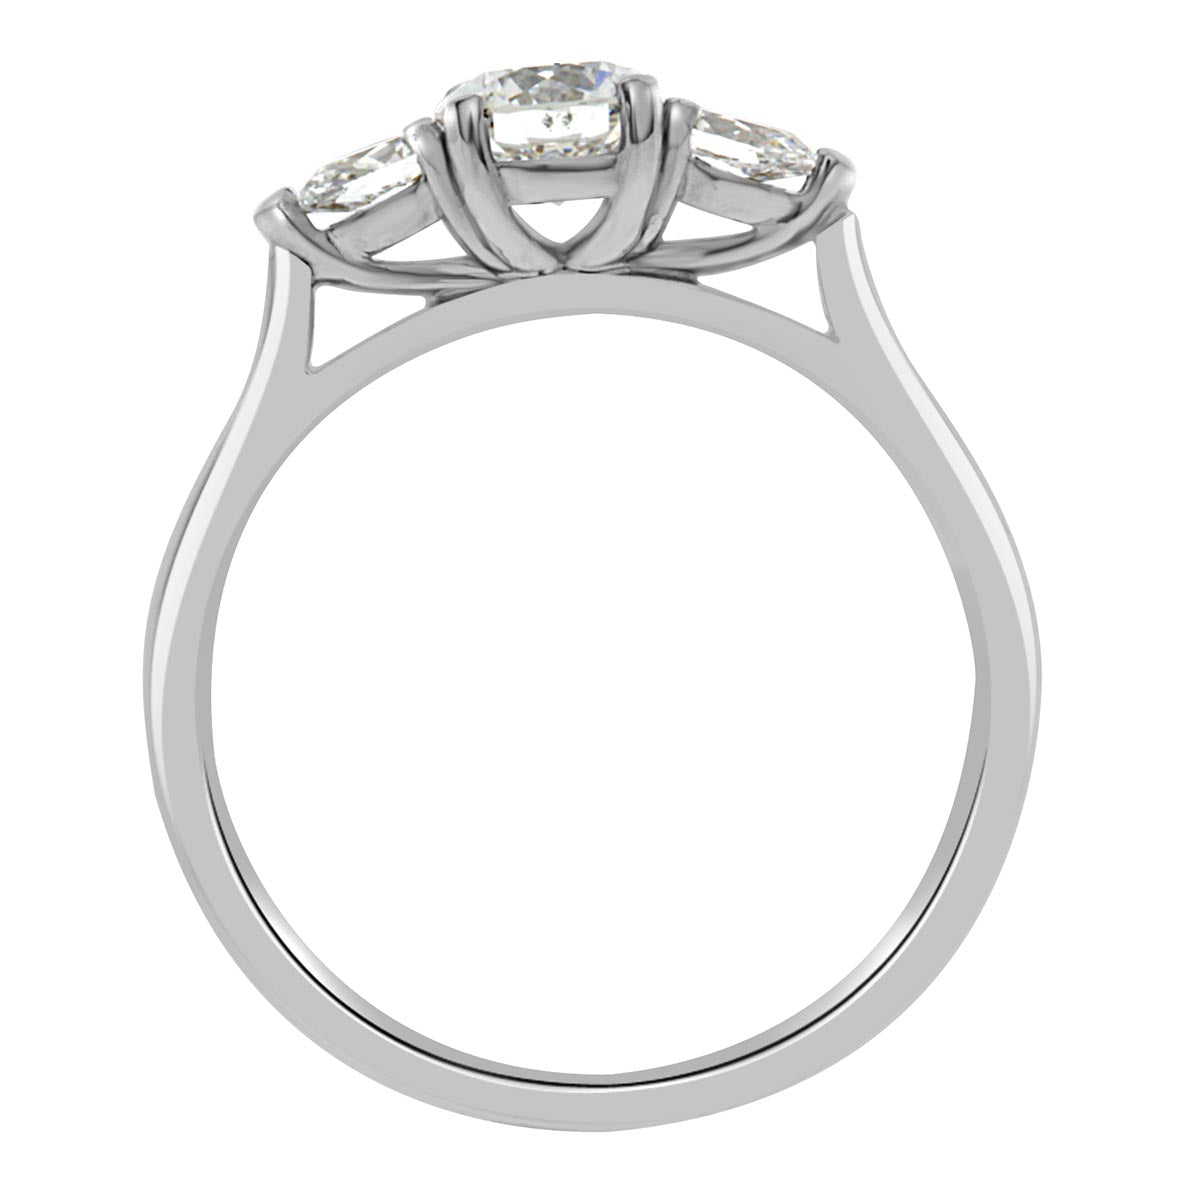 Round and Pear Diamond Ring in white gold standing upright